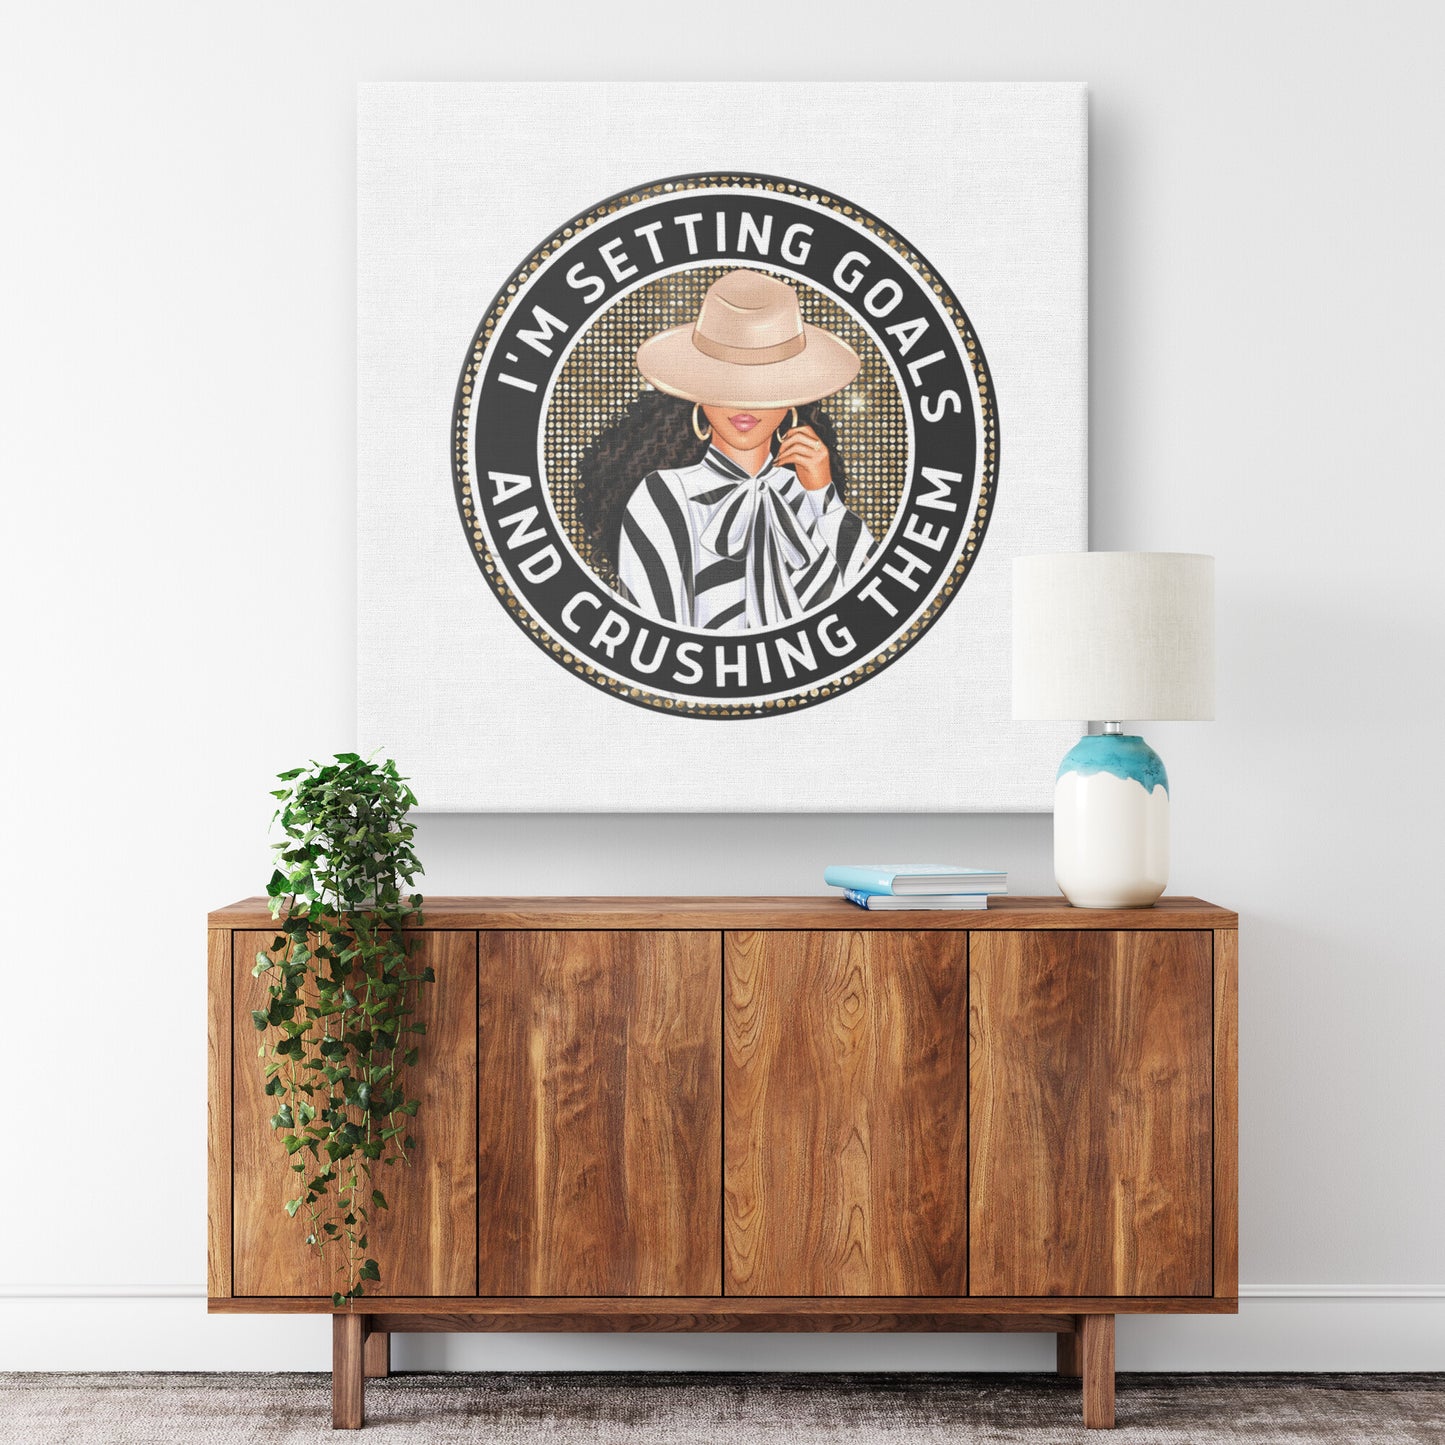 Setting Goals and Crushing Them Canvas,, Canva Wall Art , Canva Posters